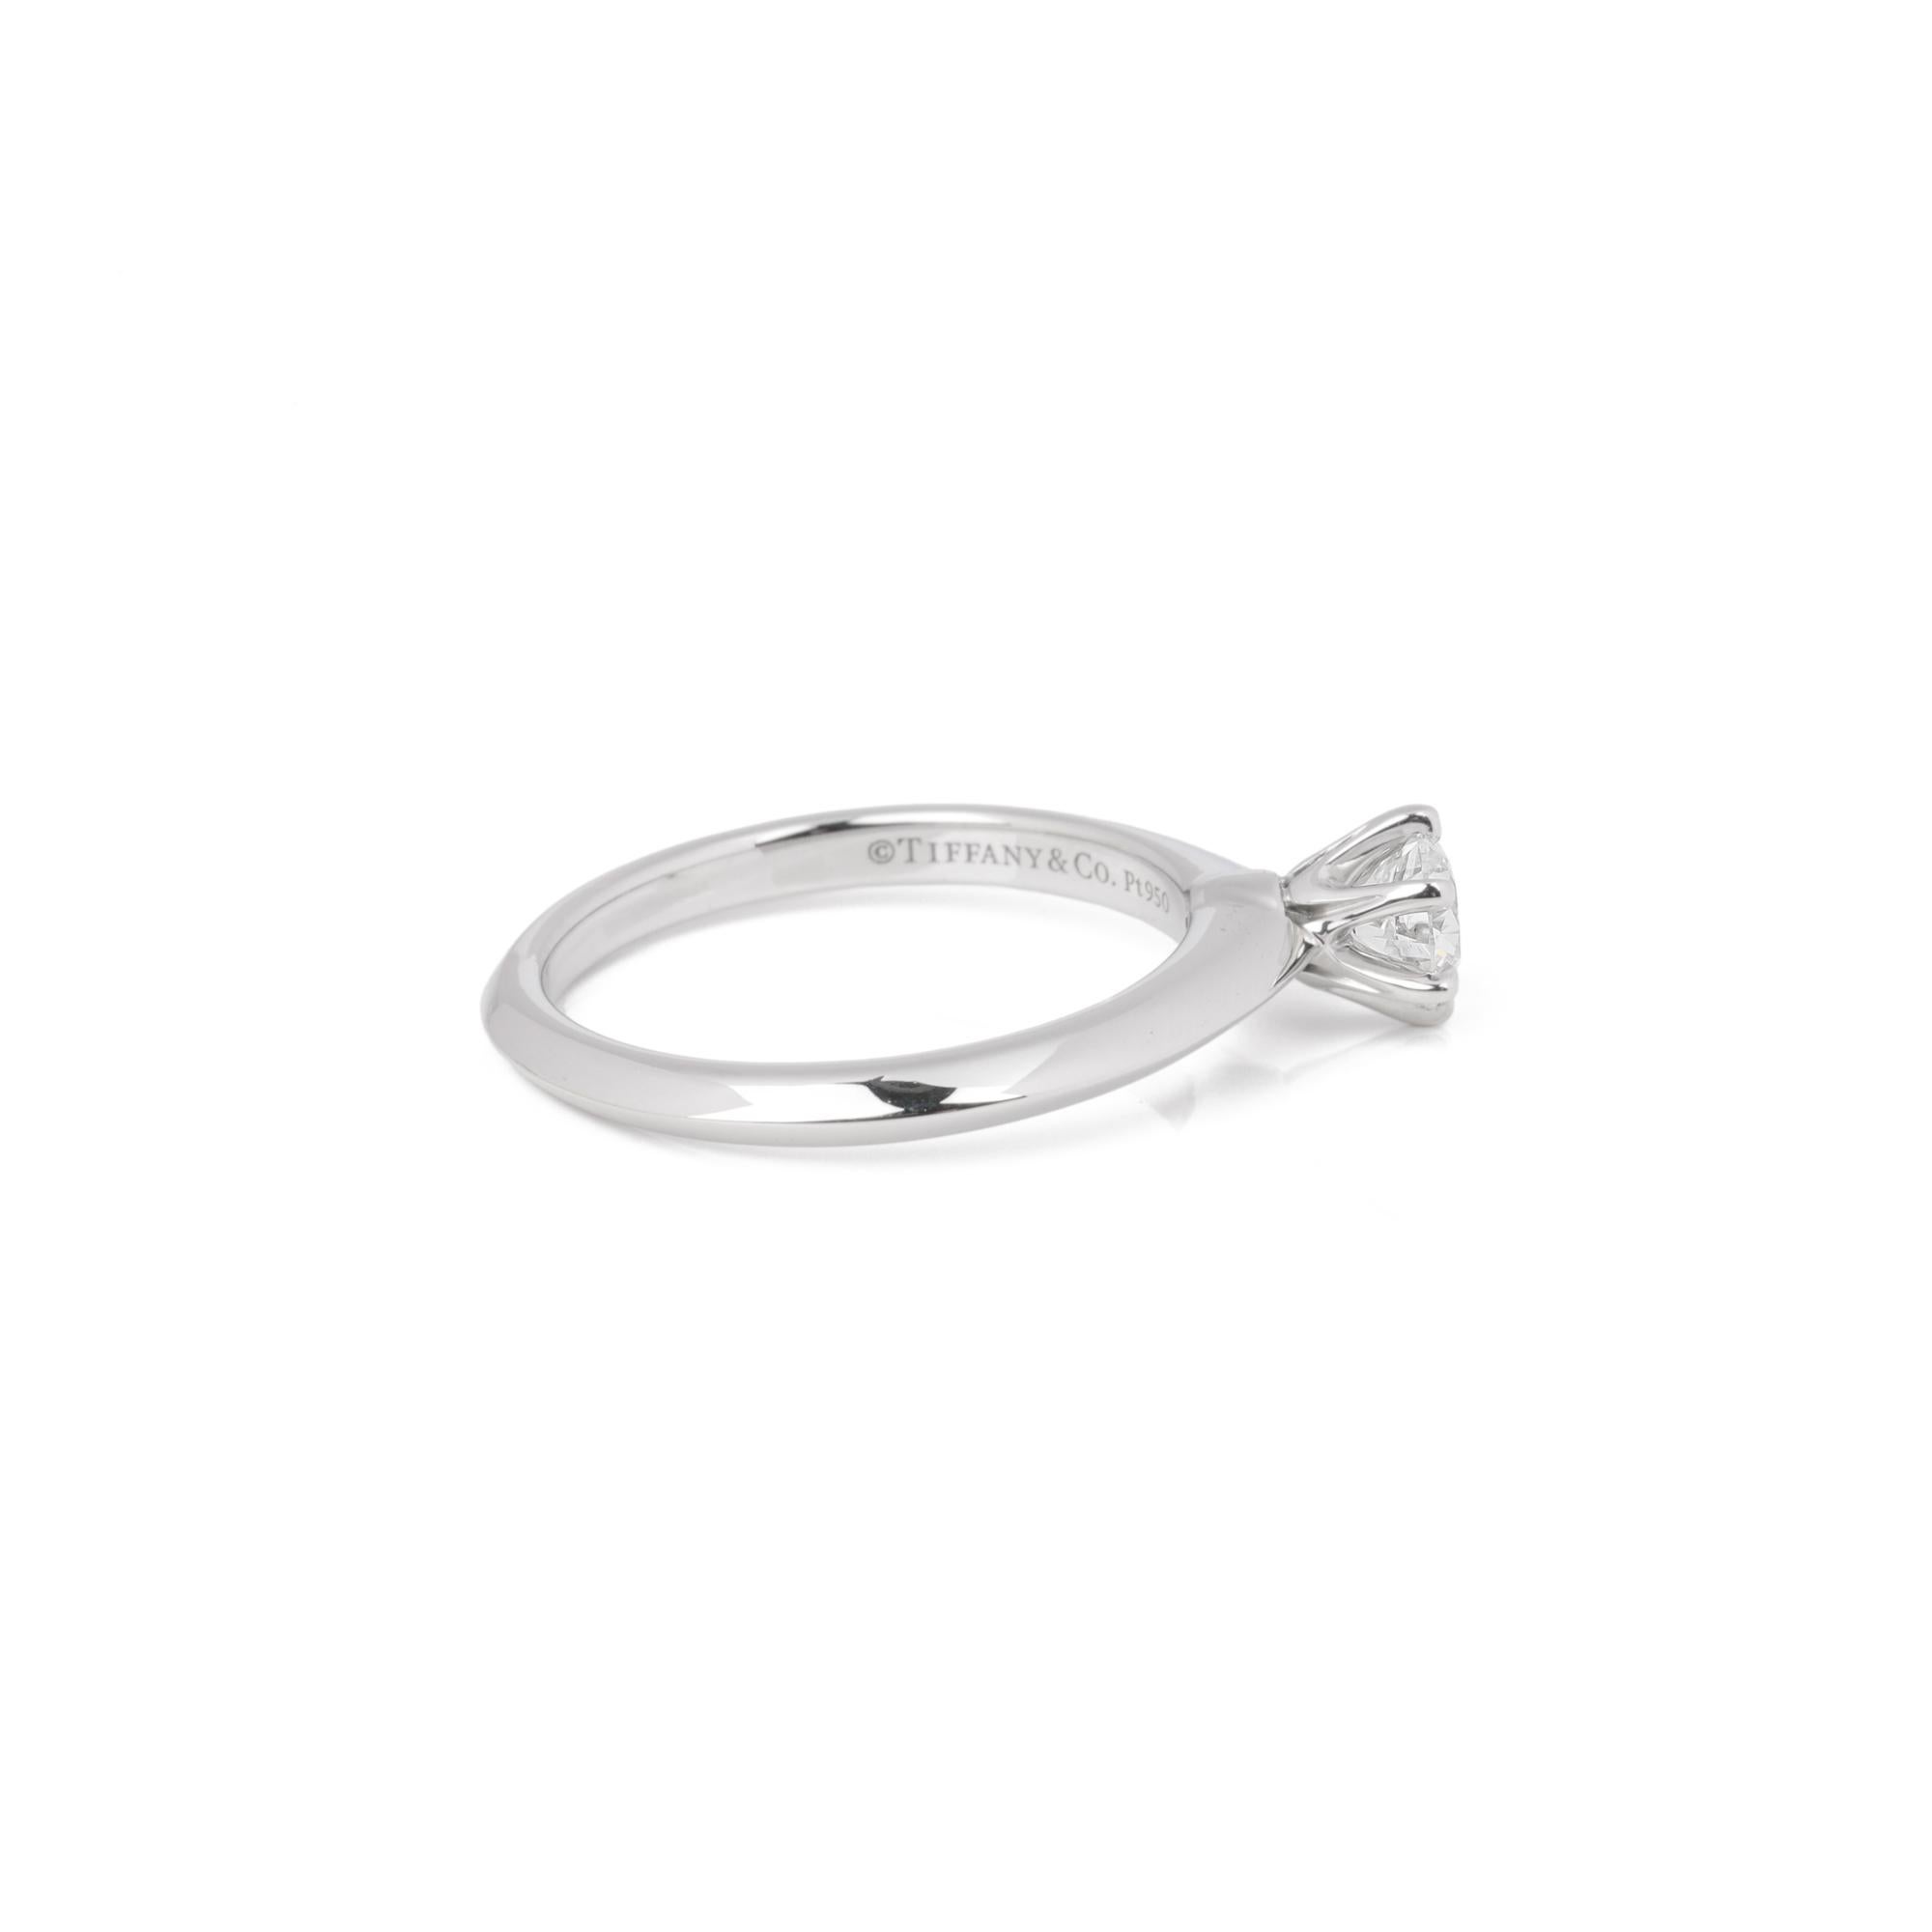 ITEM CONDITION	Excellent
MANUFACTURER	Tiffany & Co.
MODEL	Tiffany Setting
GENDER	Women's
ACCOMPANIED BY	Box and certificate
UK RING SIZE	J
EU RING SIZE	49
US RING SIZE	5
BAND WIDTH	2mm
TOTAL WEIGHT	4g
PRIMARY STONE QUANTITY	1
PRIMARY STONE CARAT